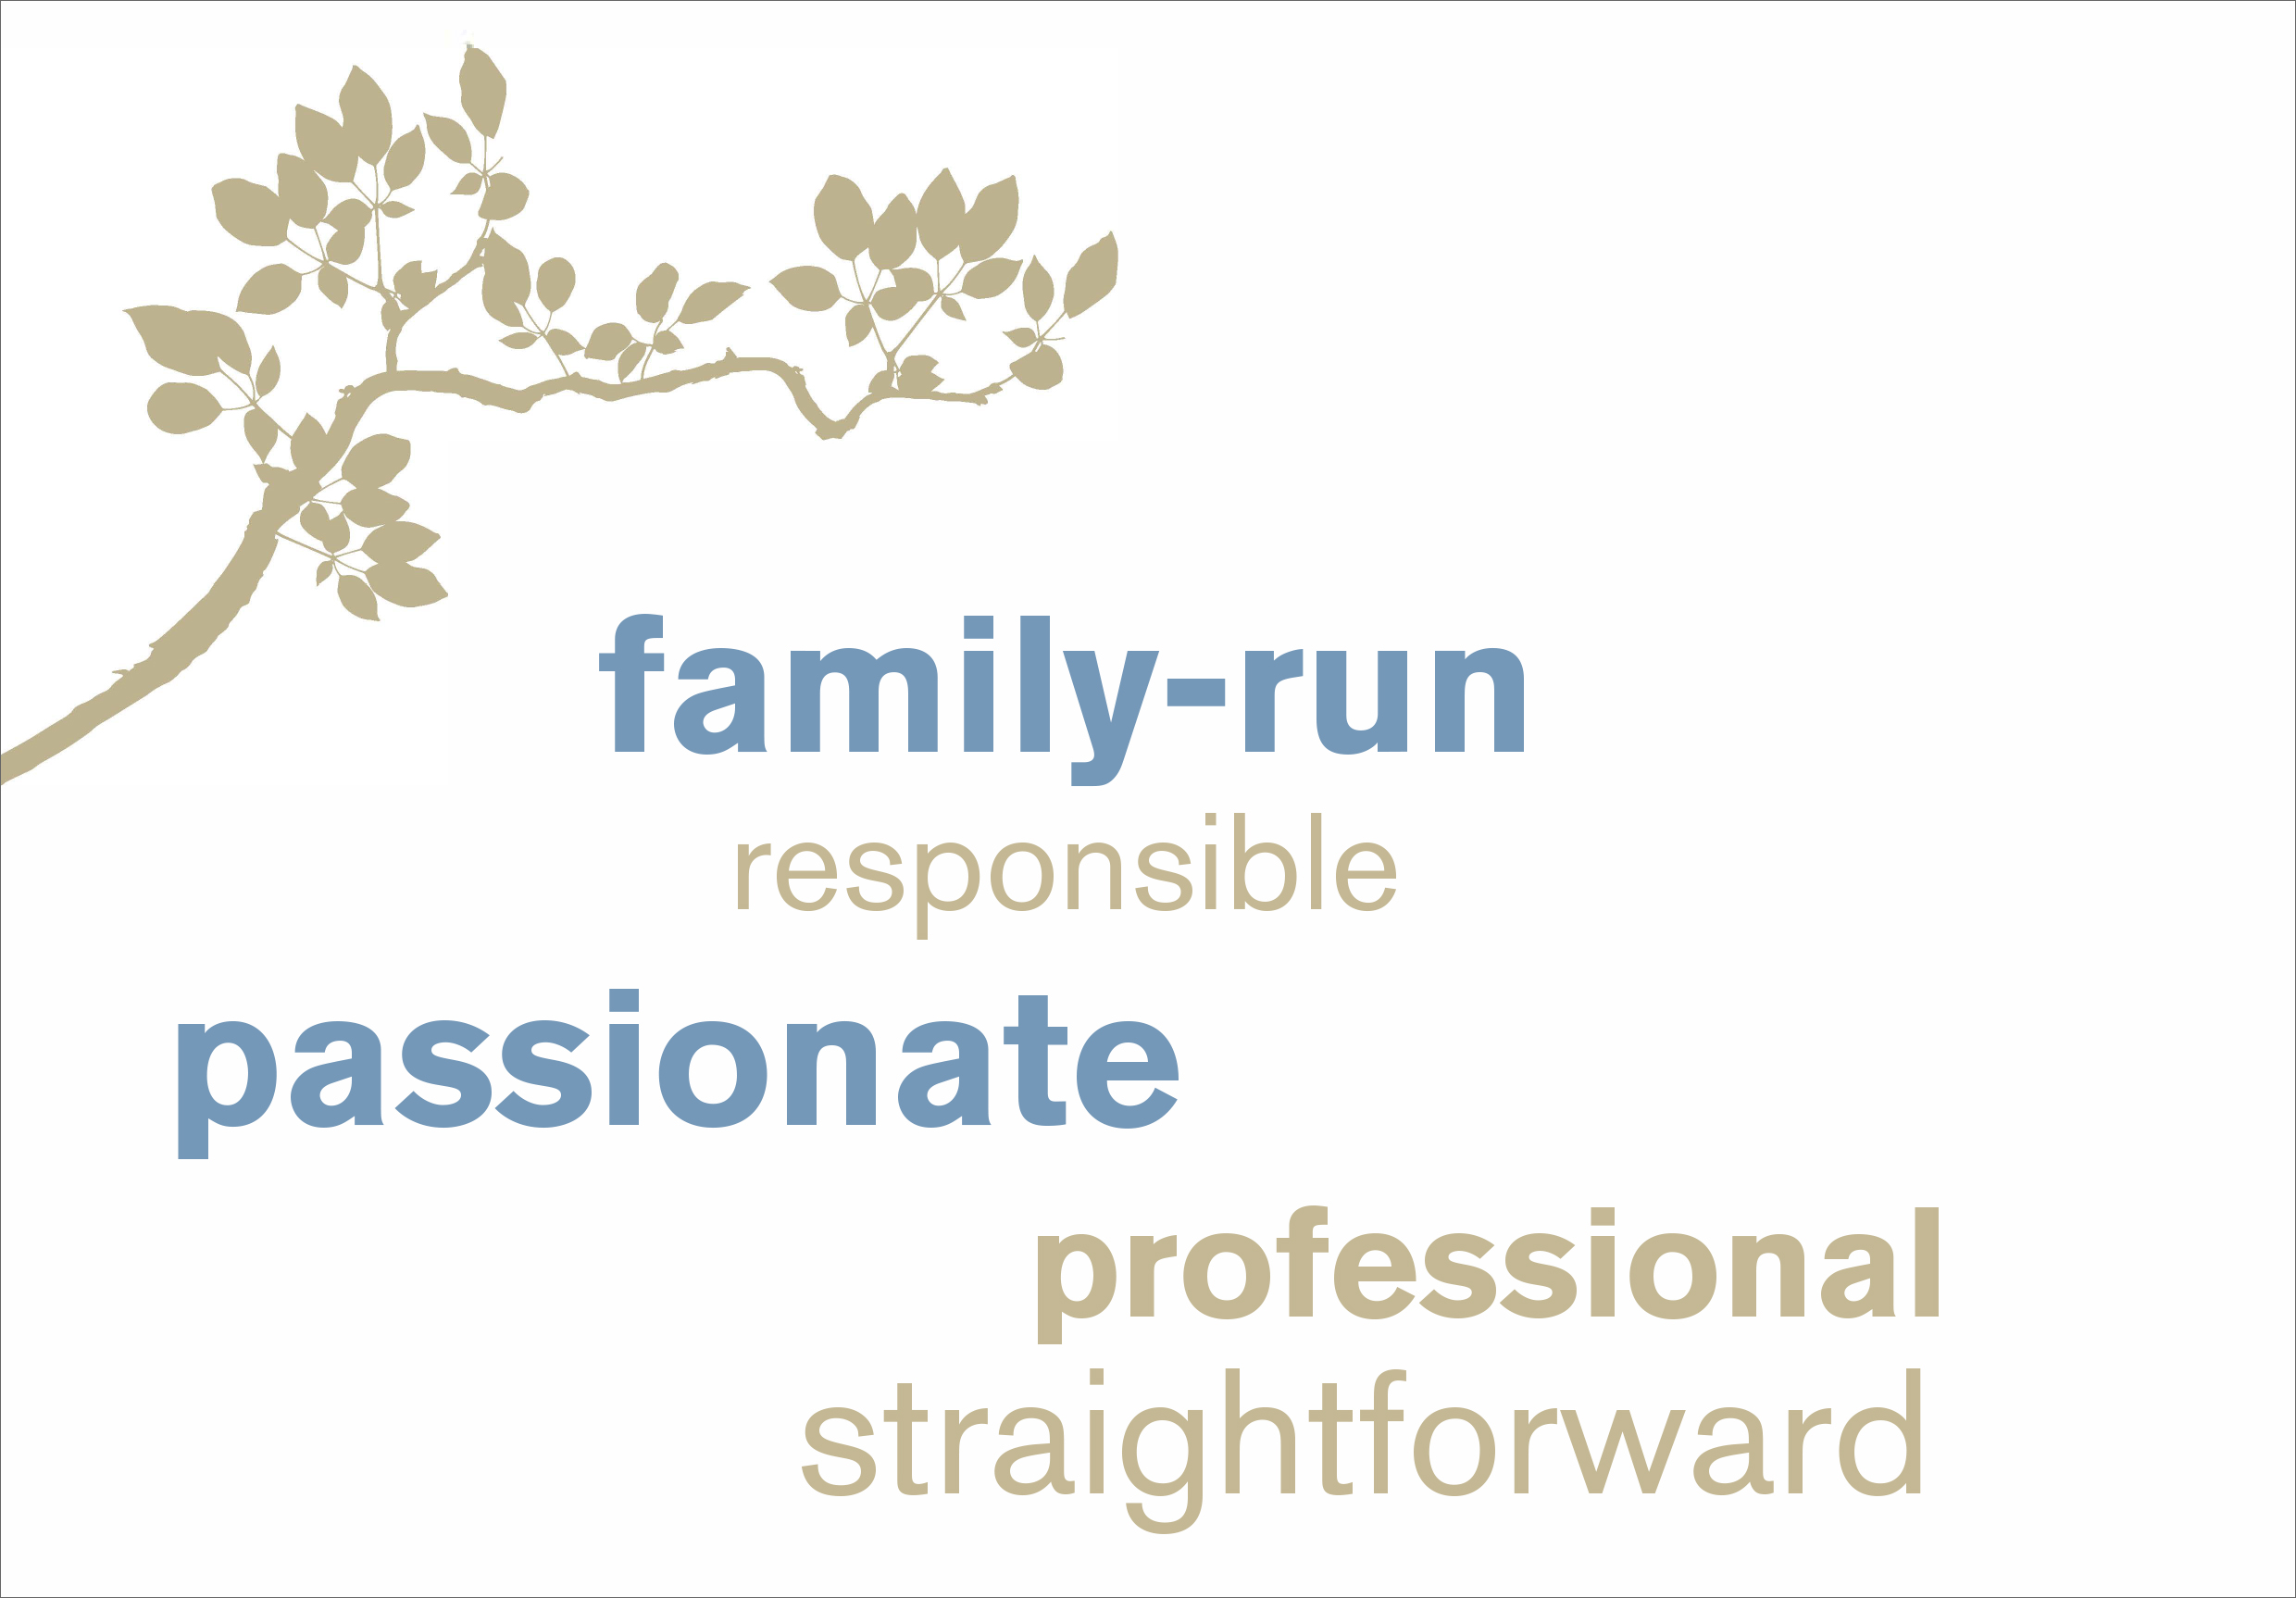 Graph of Renggli construction values: professional, passionate, family-run, responsible and straigthforward.